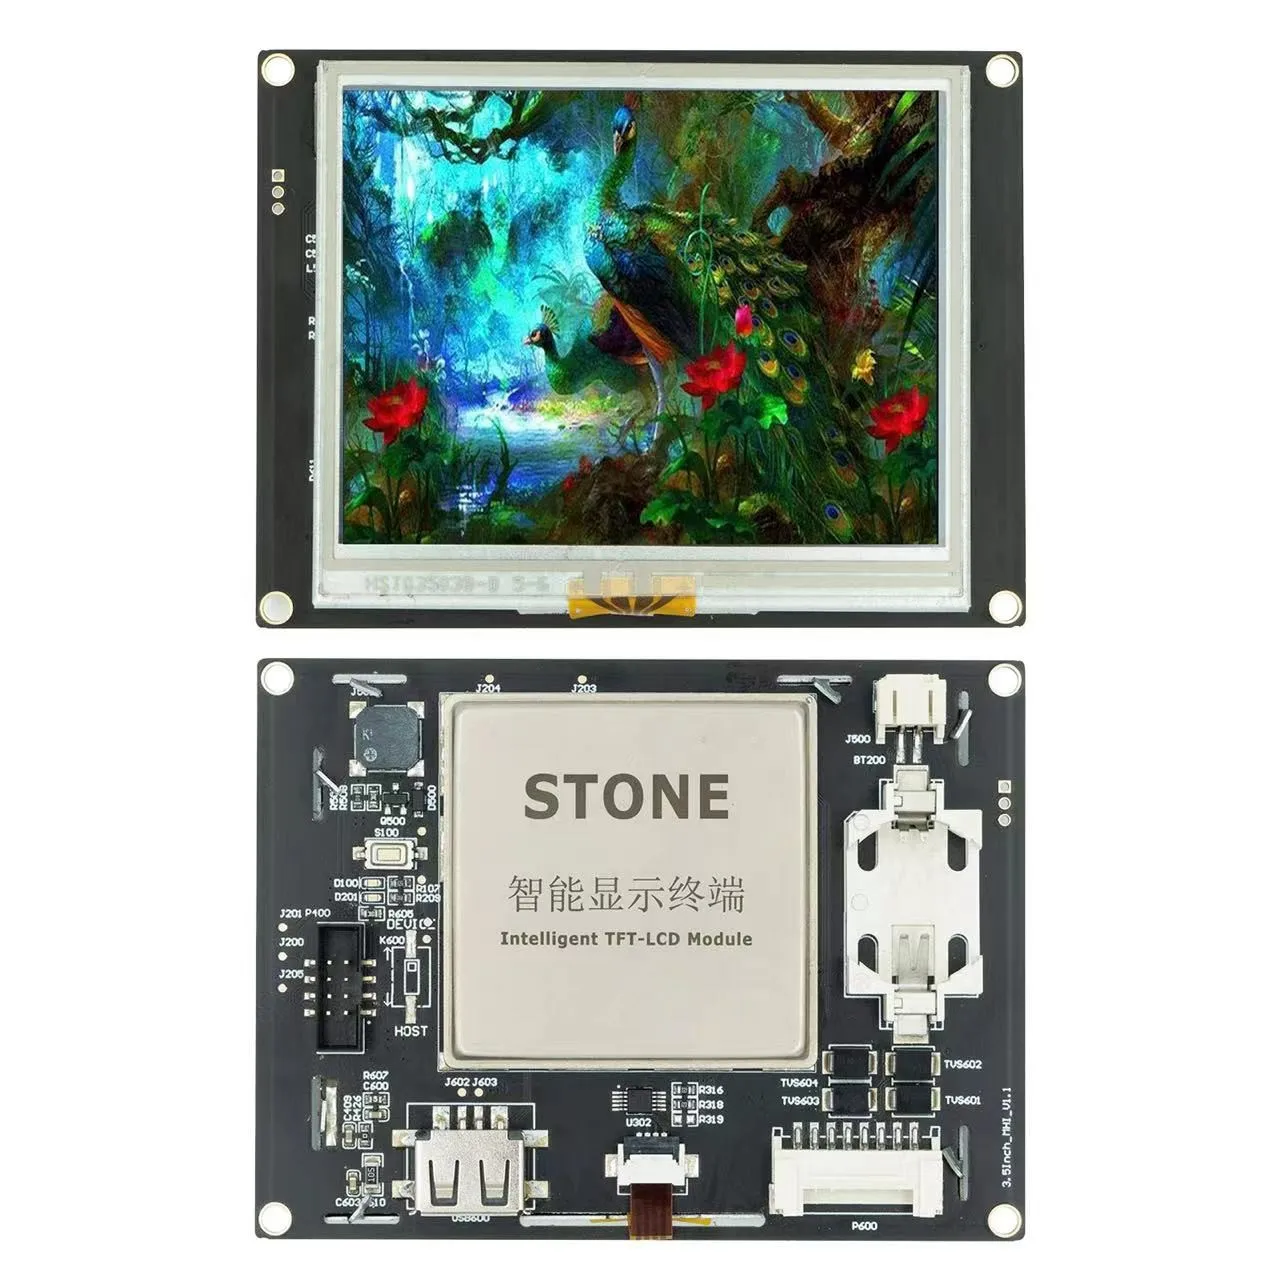 Smart HMI 3.5inch Industry Series Screen 320*240 TFT LCD monitor & 4-wire resistance touch panel 256MB of flash memory